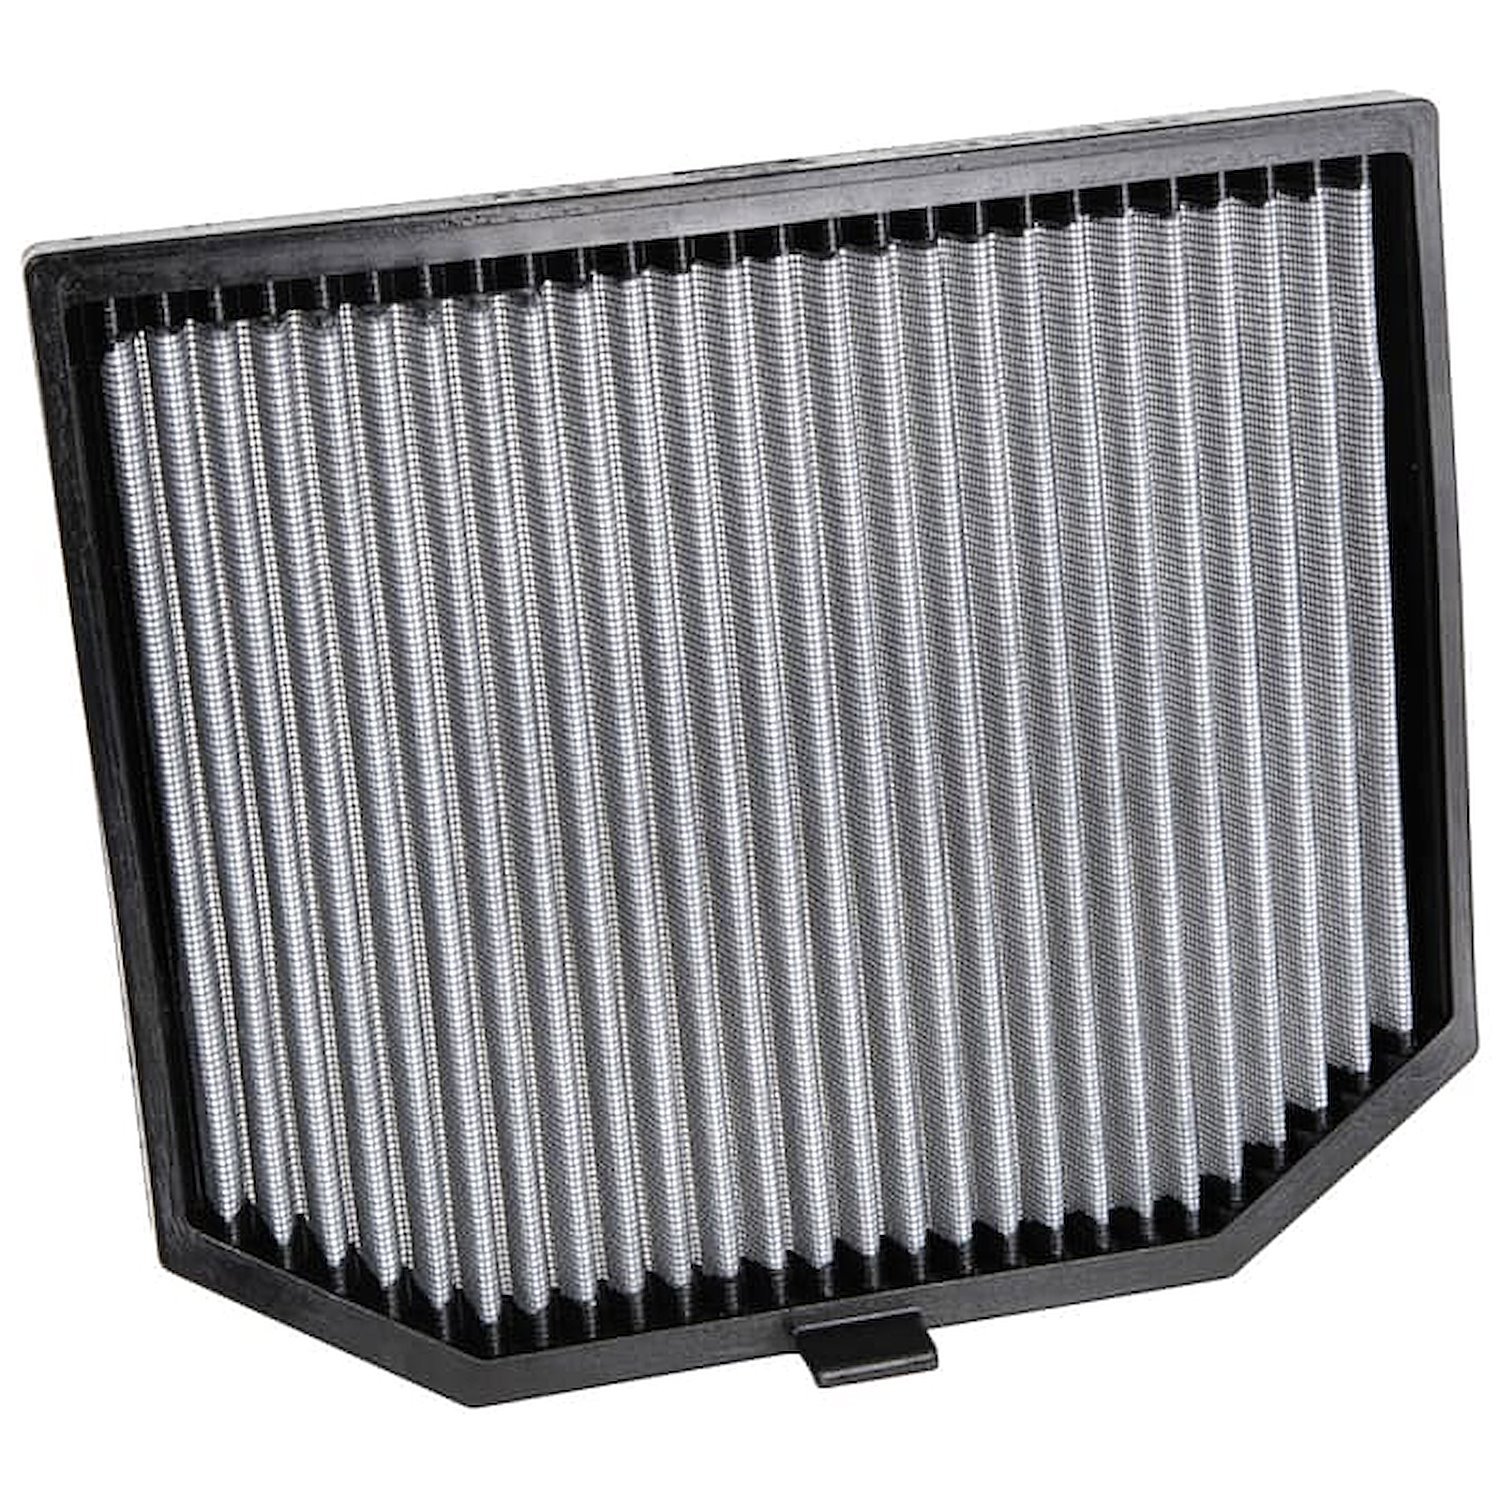 Replacement Cabin Filter 2011-2017 Chevy Caprice, 2014-2017 Chevy SS, 2008-2009 Pontiac G8